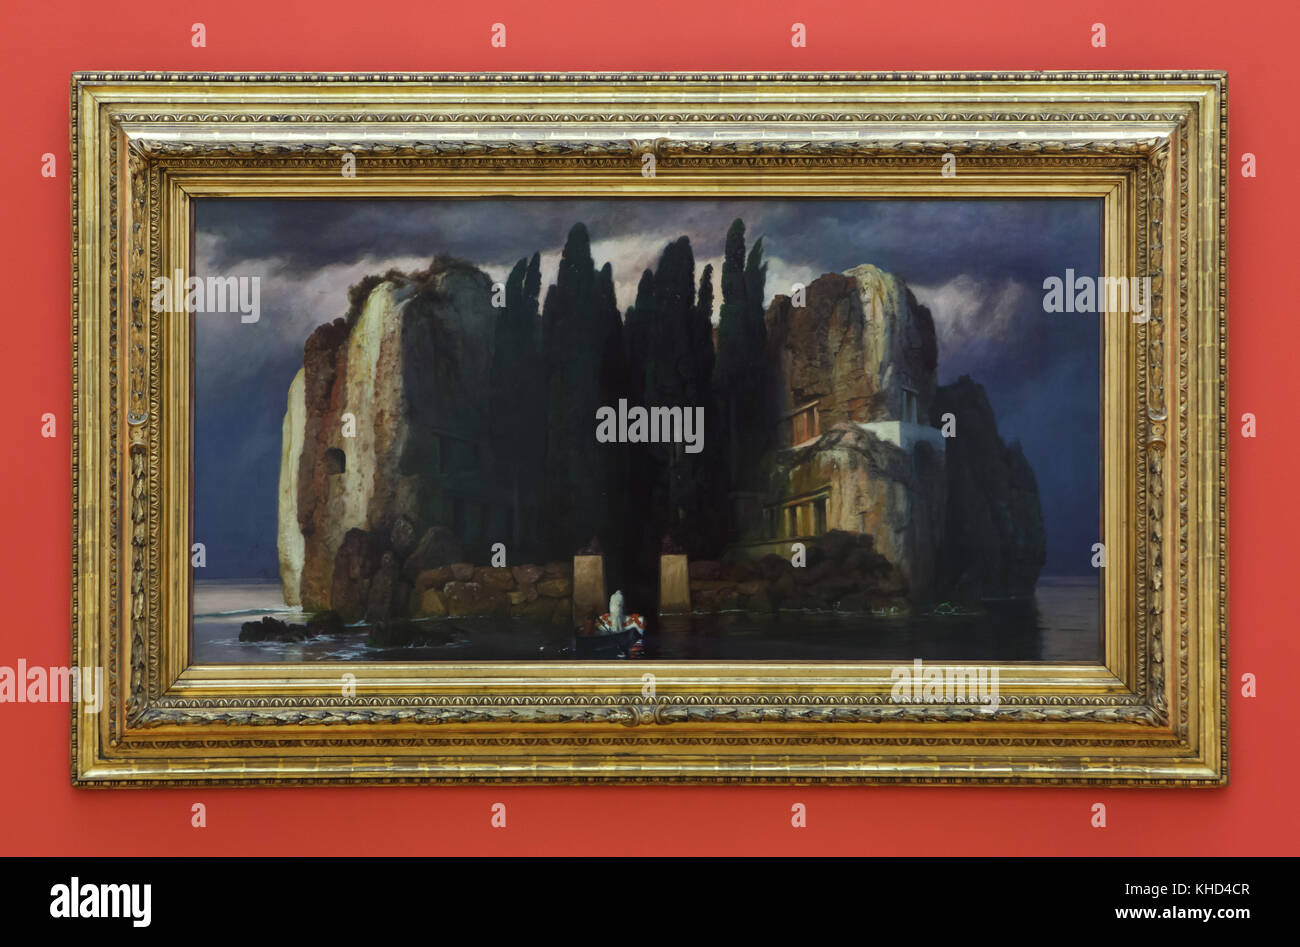 Painting 'Island of the Dead' (1886) by Swiss symbolist painter Arnold Böcklin on display in the Museum der bildenden Künste (Museum of Fine Arts) in Leipzig, Saxony, Germany. Stock Photo